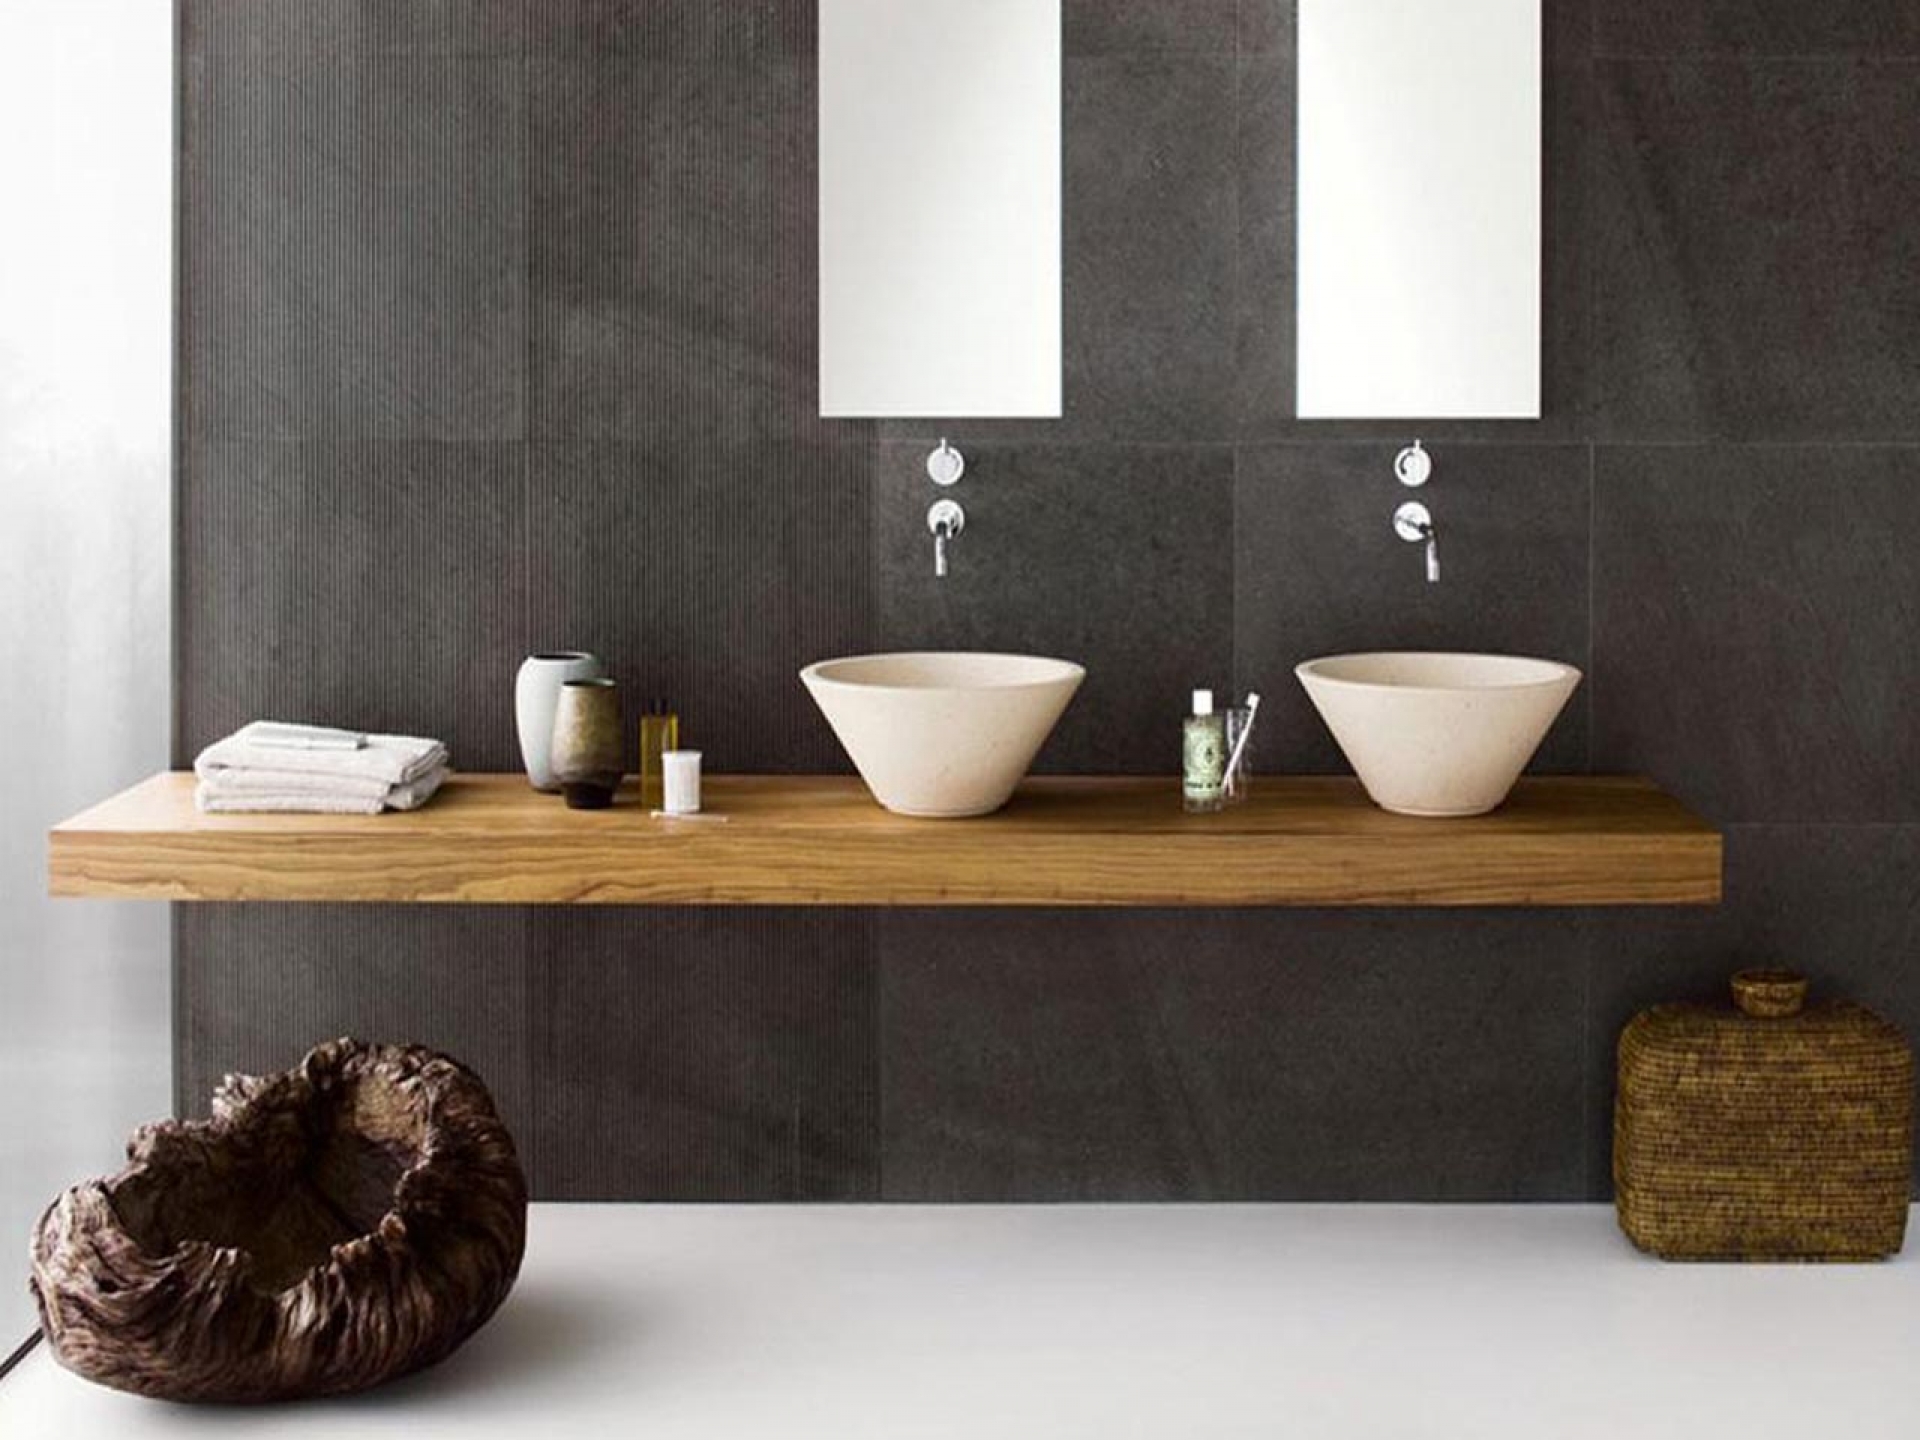 4 Modern Bathroom Functions You Have To See